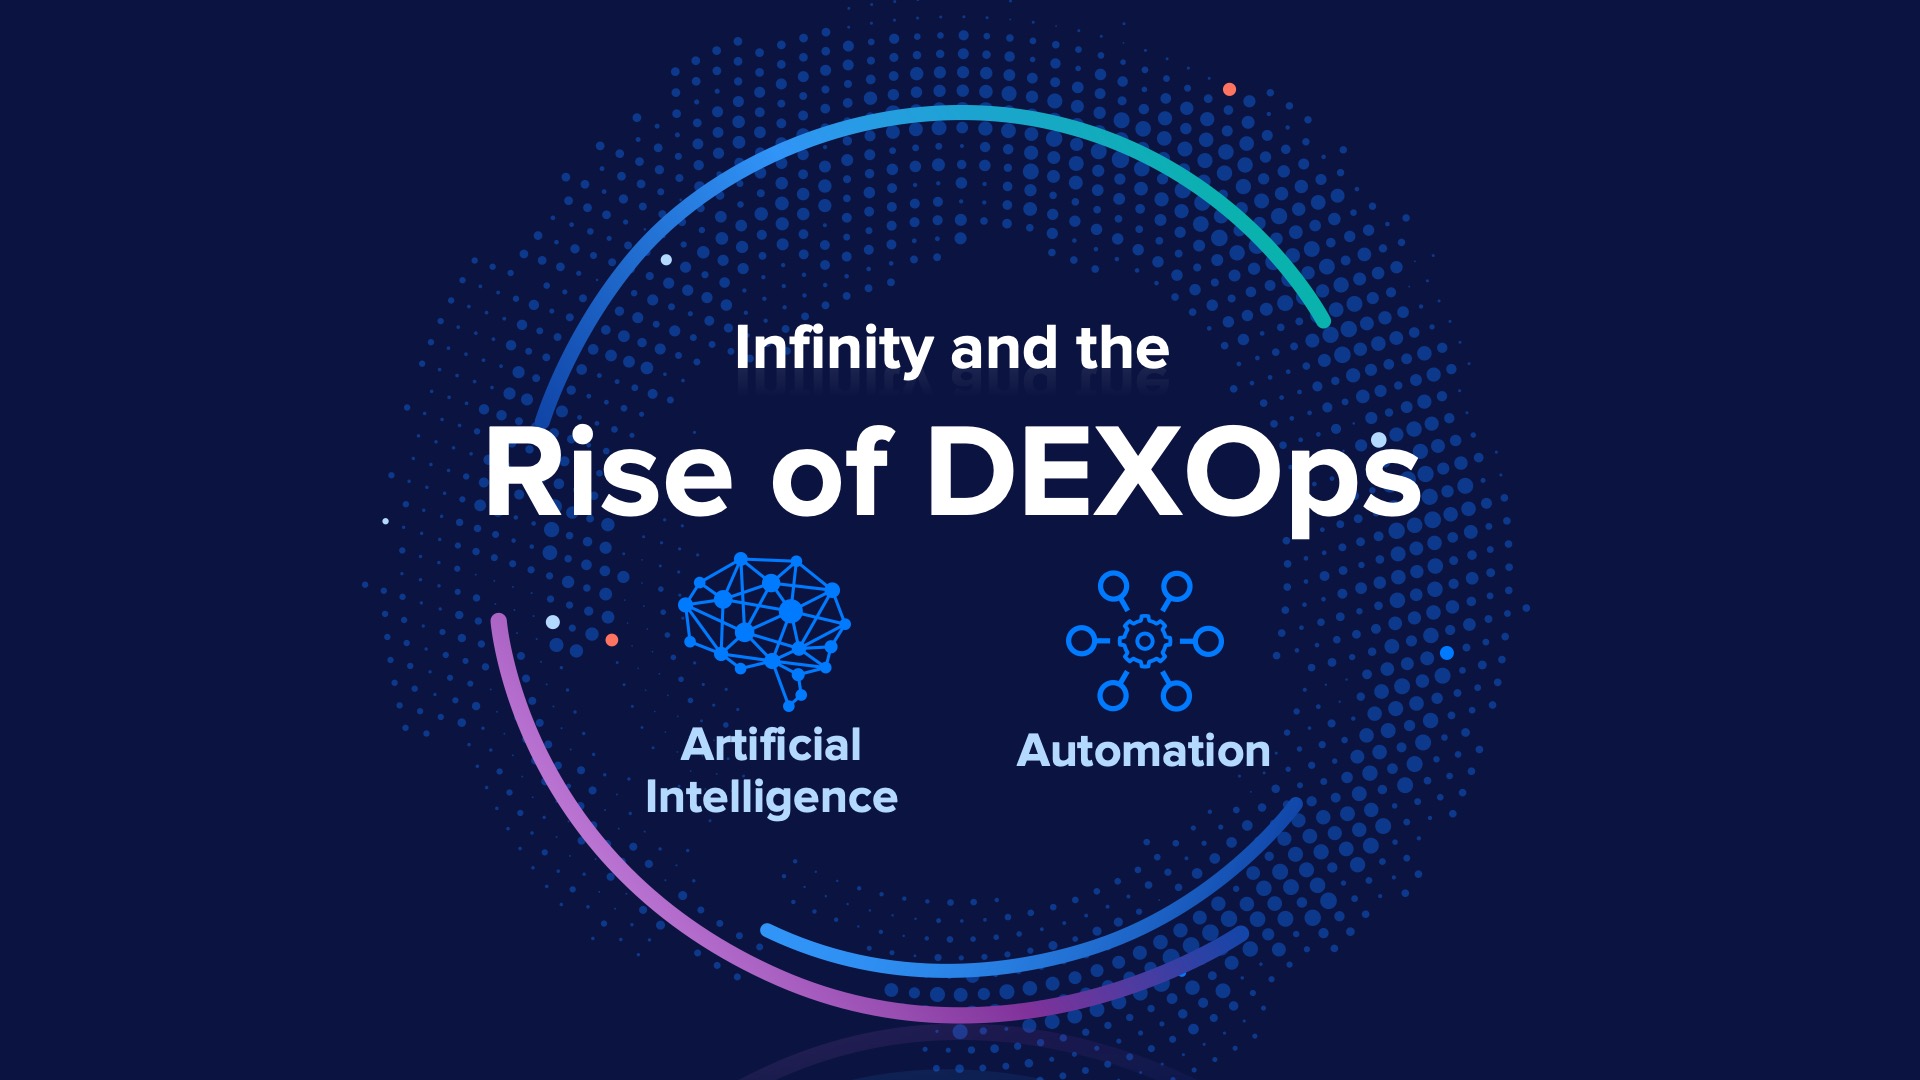 A slide design from the Nexthink Experience everywhere event. Two icons represent two parts of DEXOps, A. I. and automation.